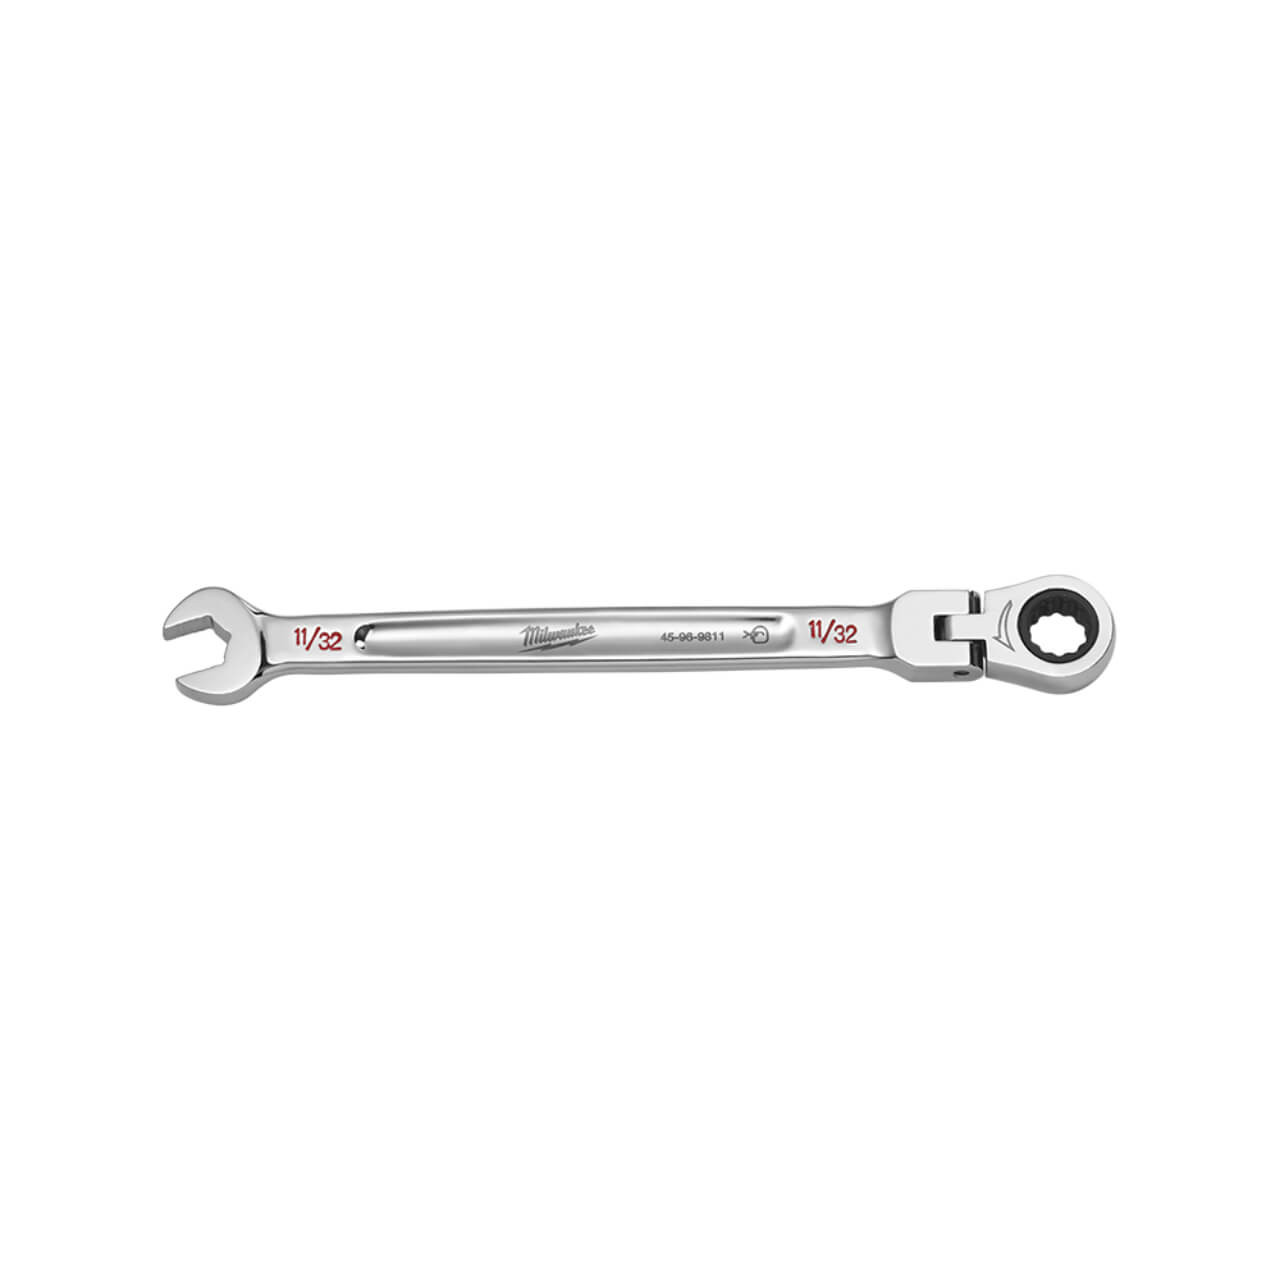 Milwaukee 11/32 Flex Head Ratcheting Combination Wrench Imperial